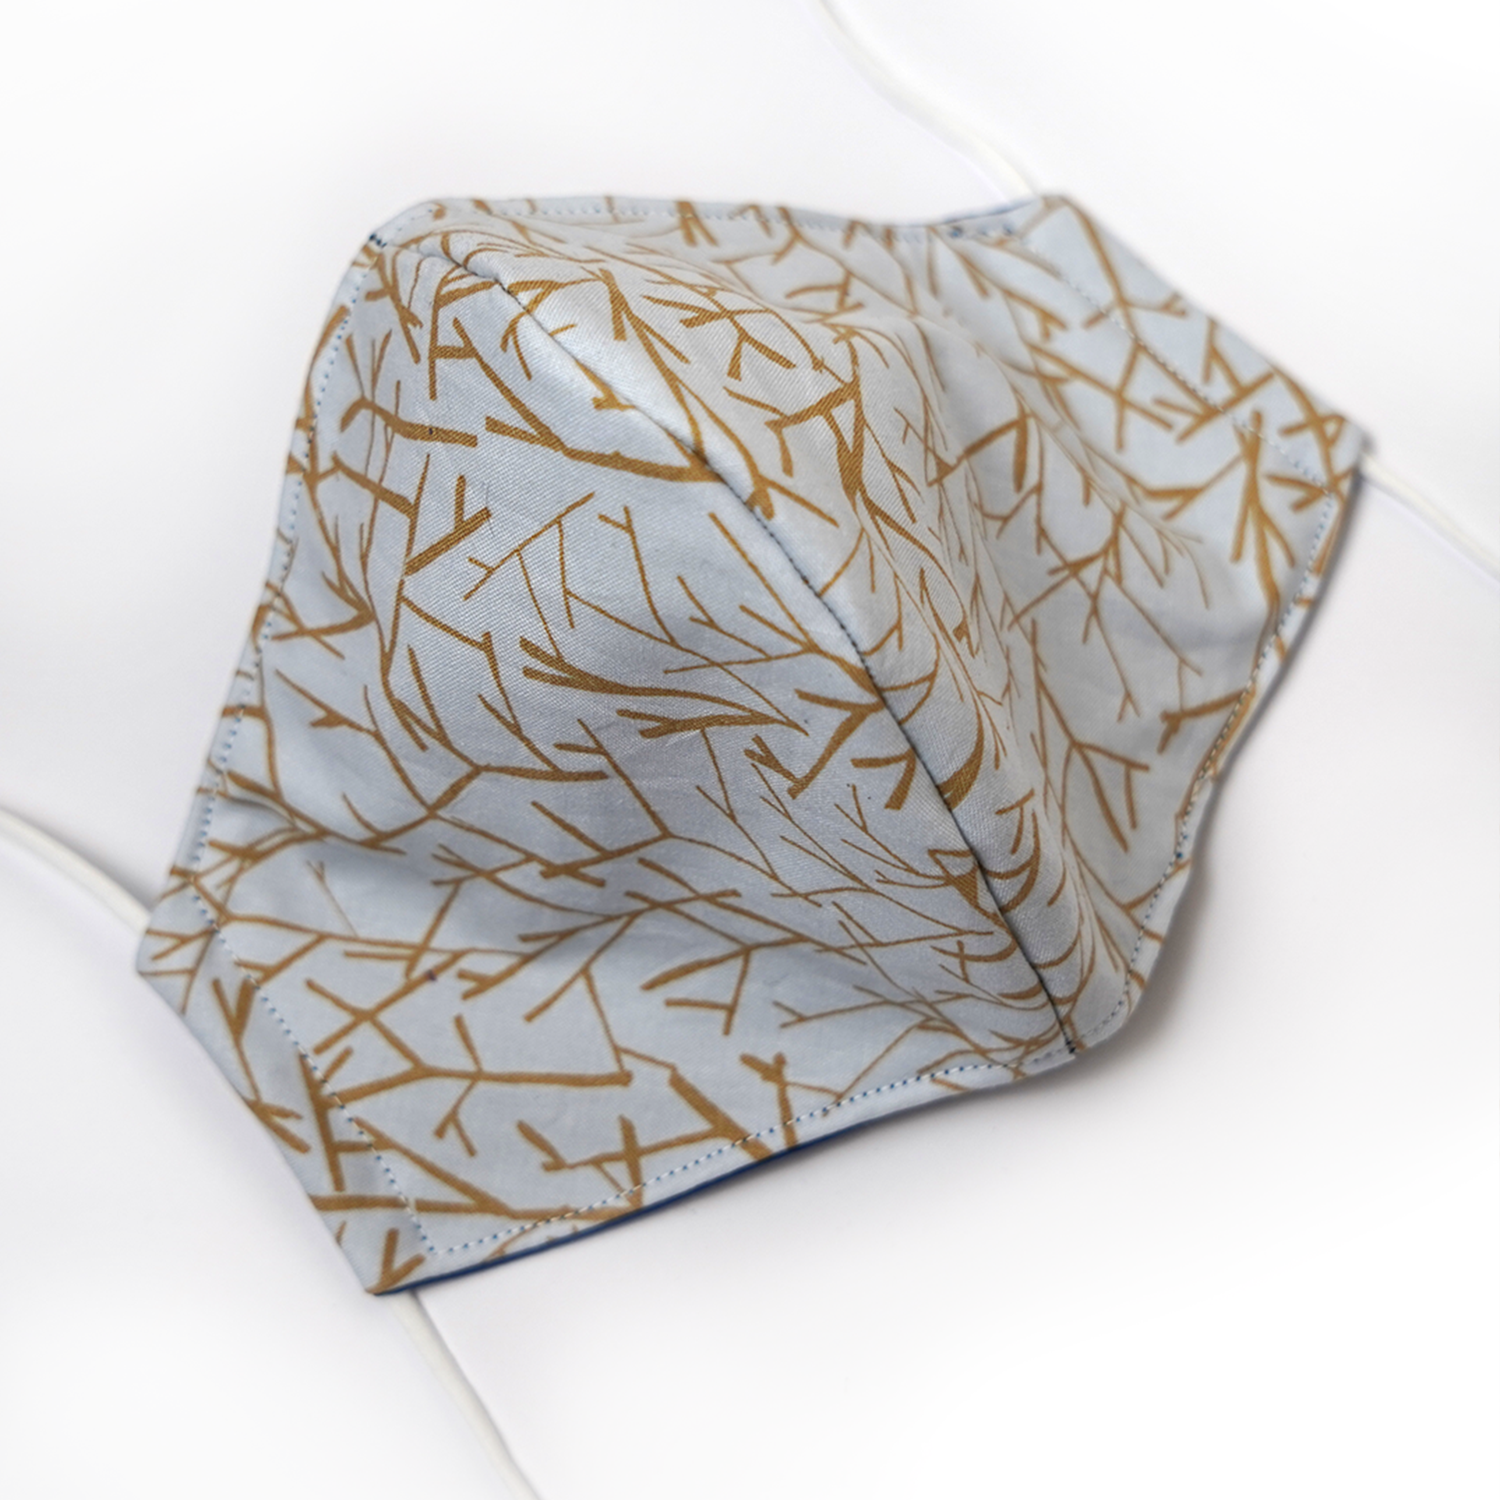 Triple layered face mask made in Melbourne Australia from cotton and poplin featuring a unique golden branch print